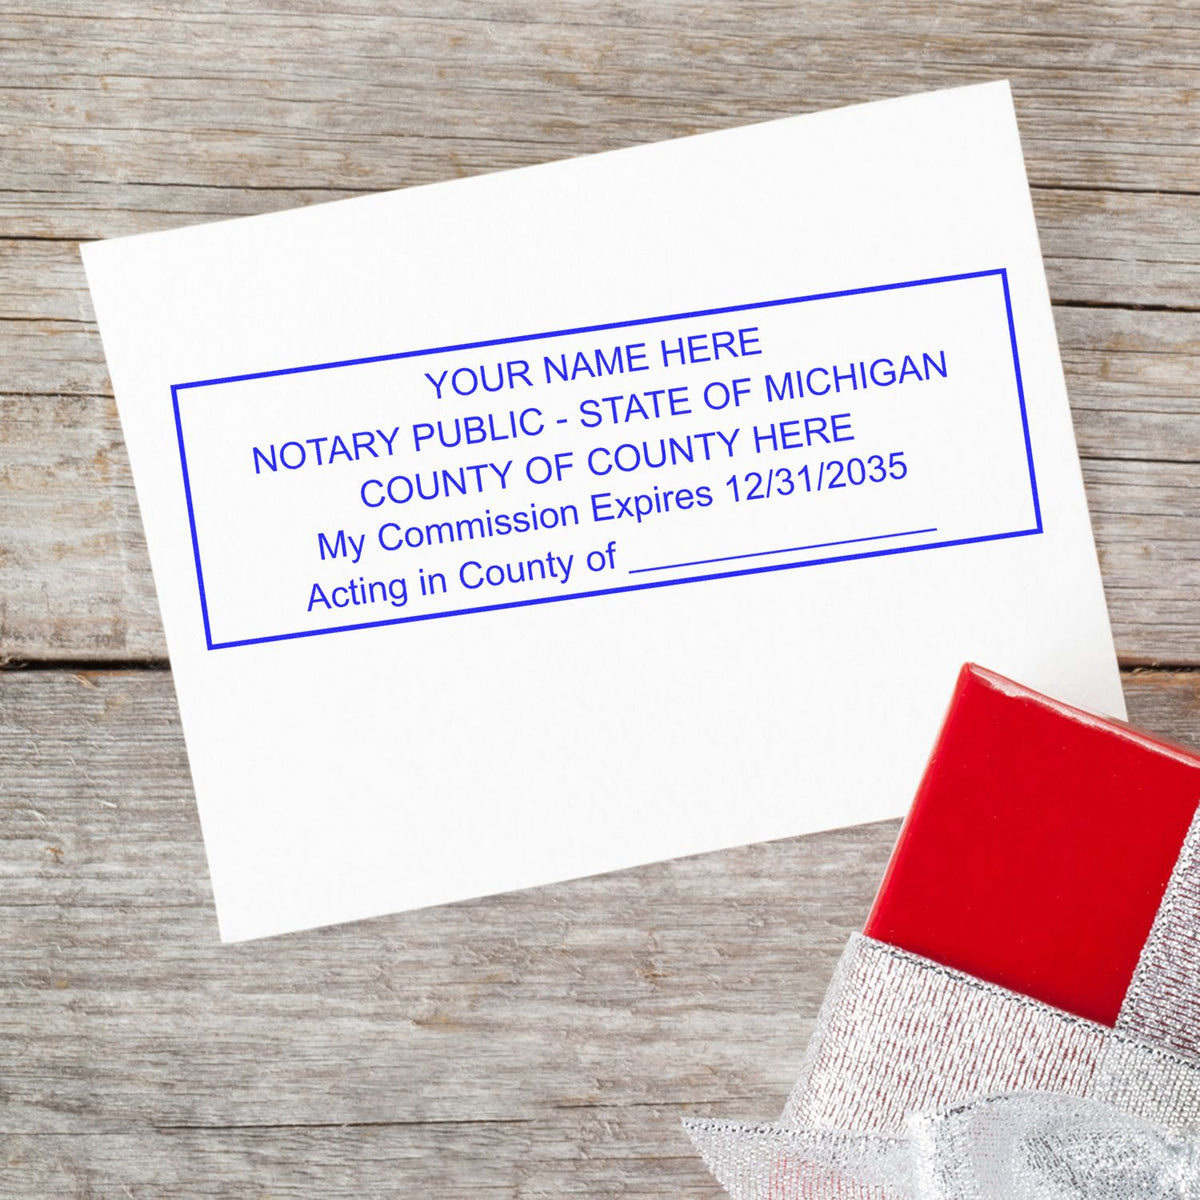 A lifestyle photo showing a stamped image of the Wooden Handle Michigan State Seal Notary Public Stamp on a piece of paper